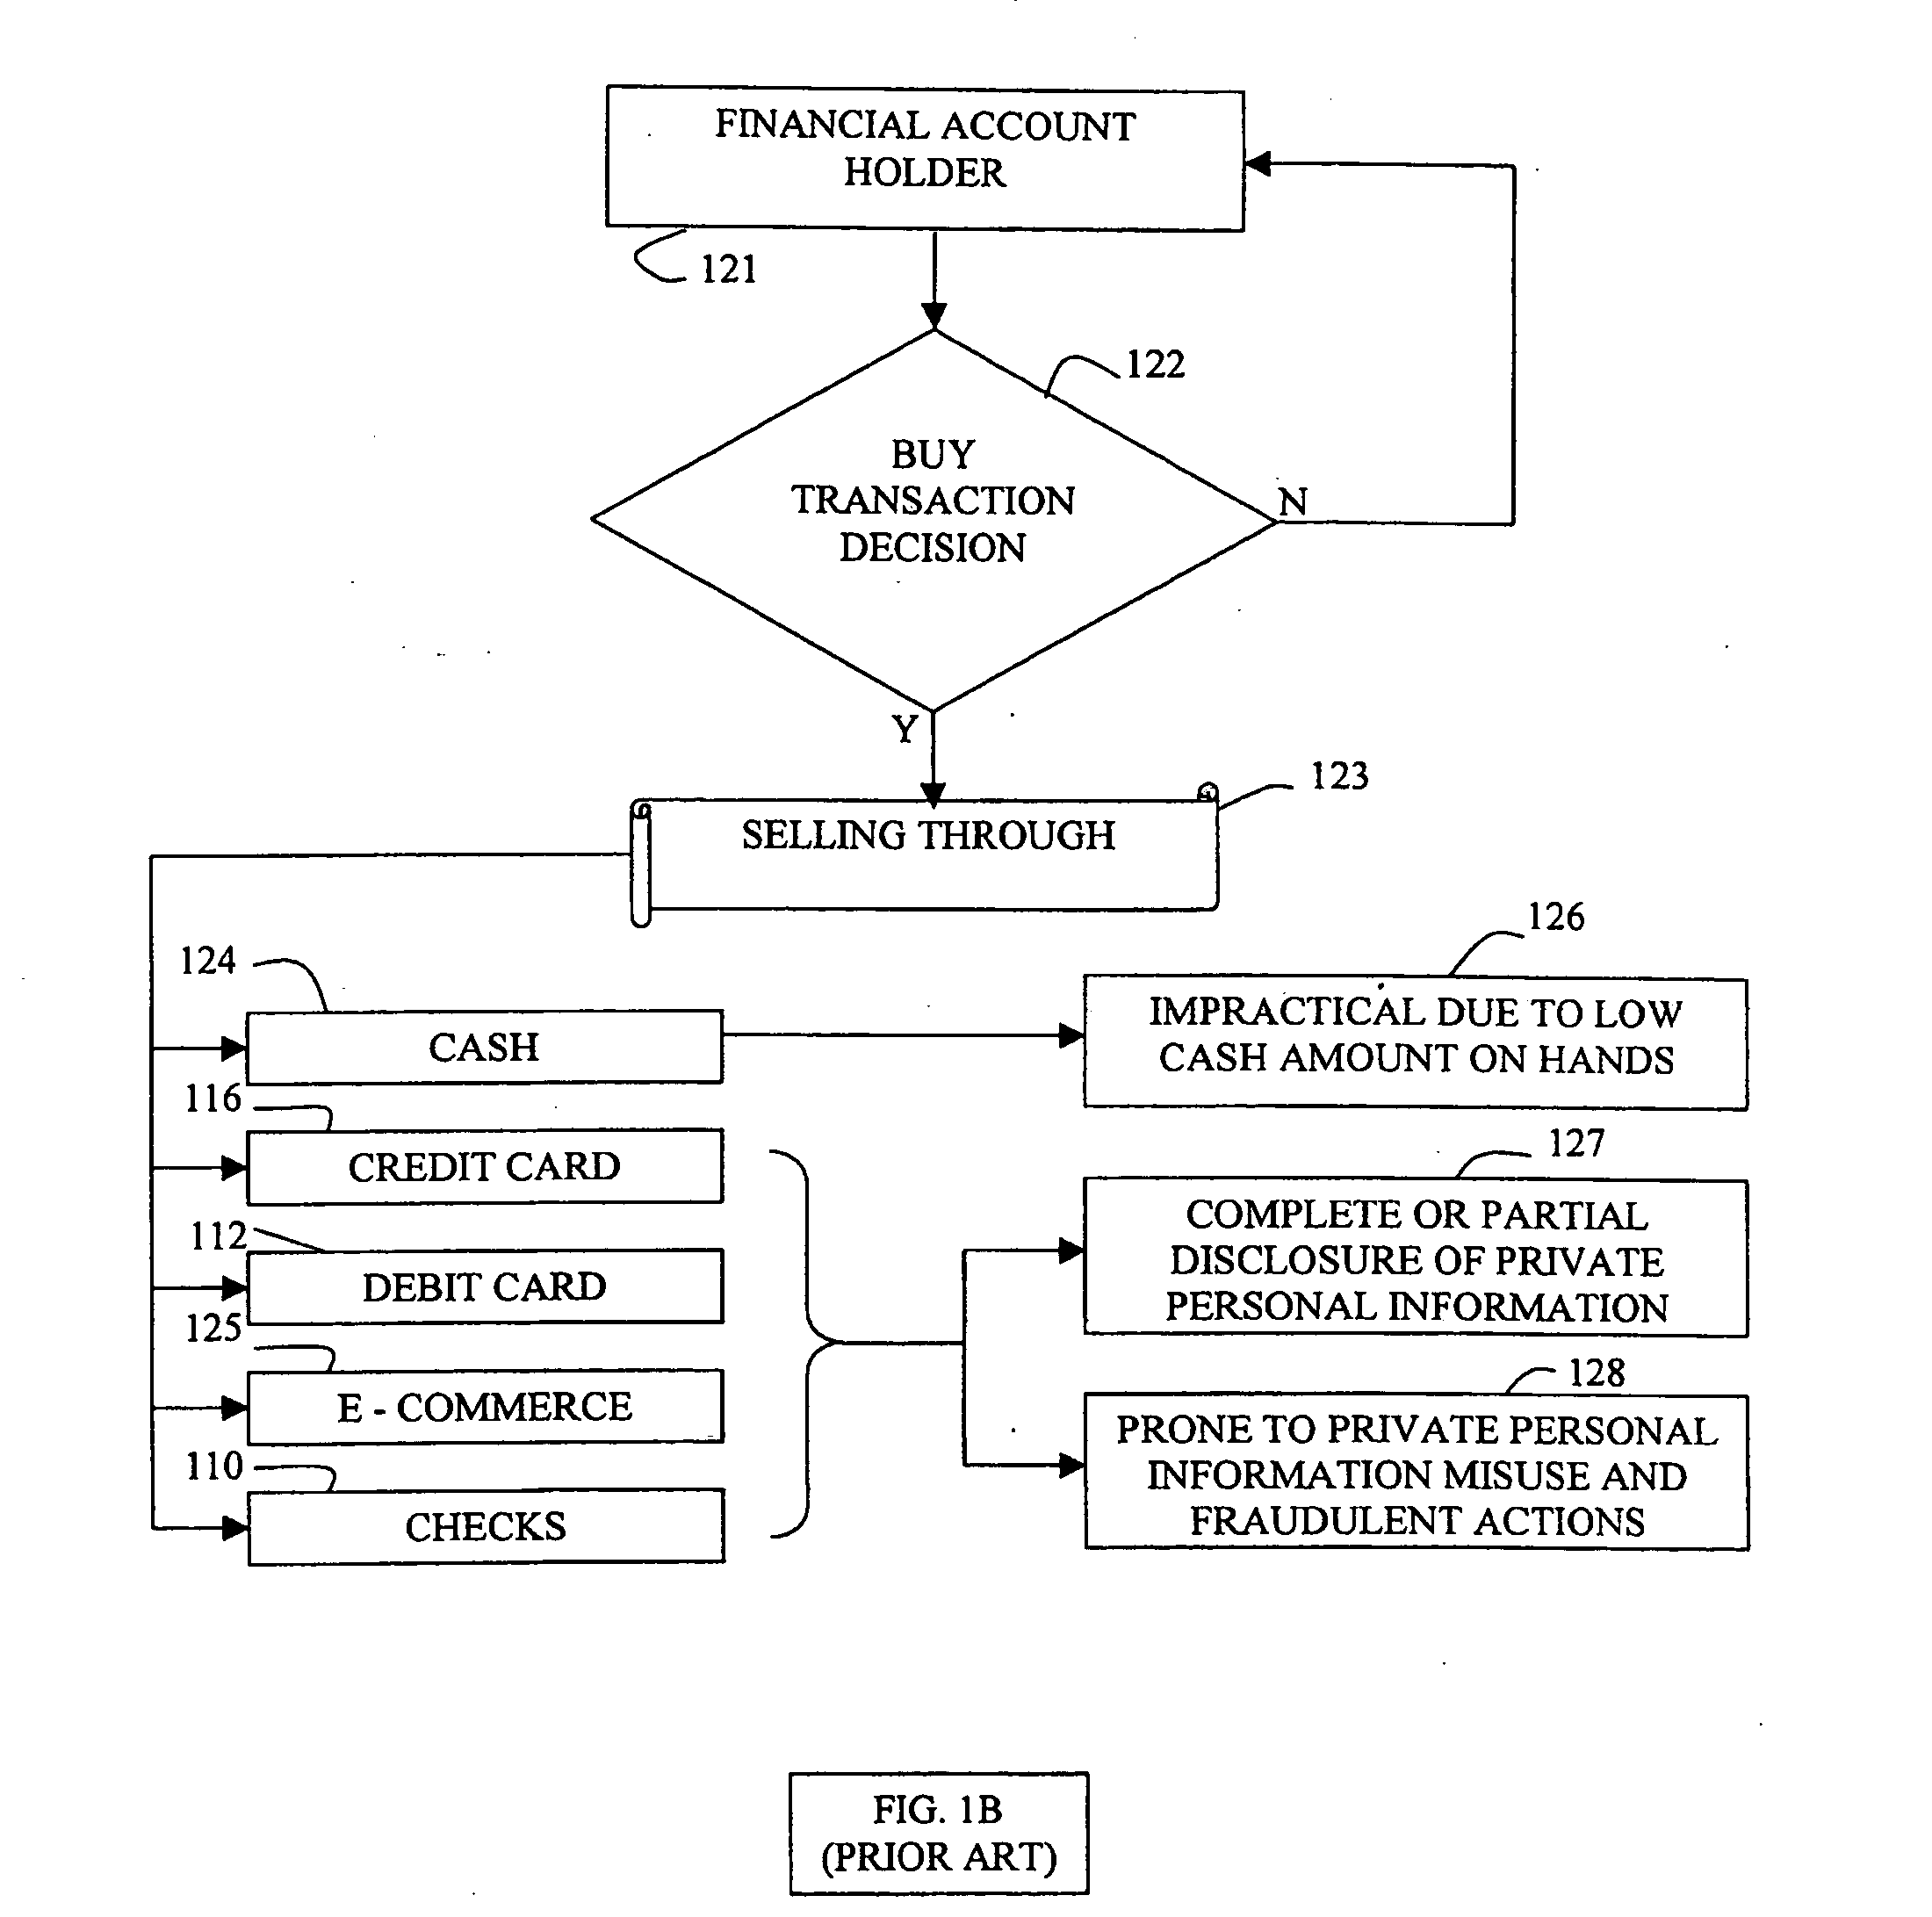 Method of one time authentication response to a session-specific challenge indicating a random subset of password or PIN character positions